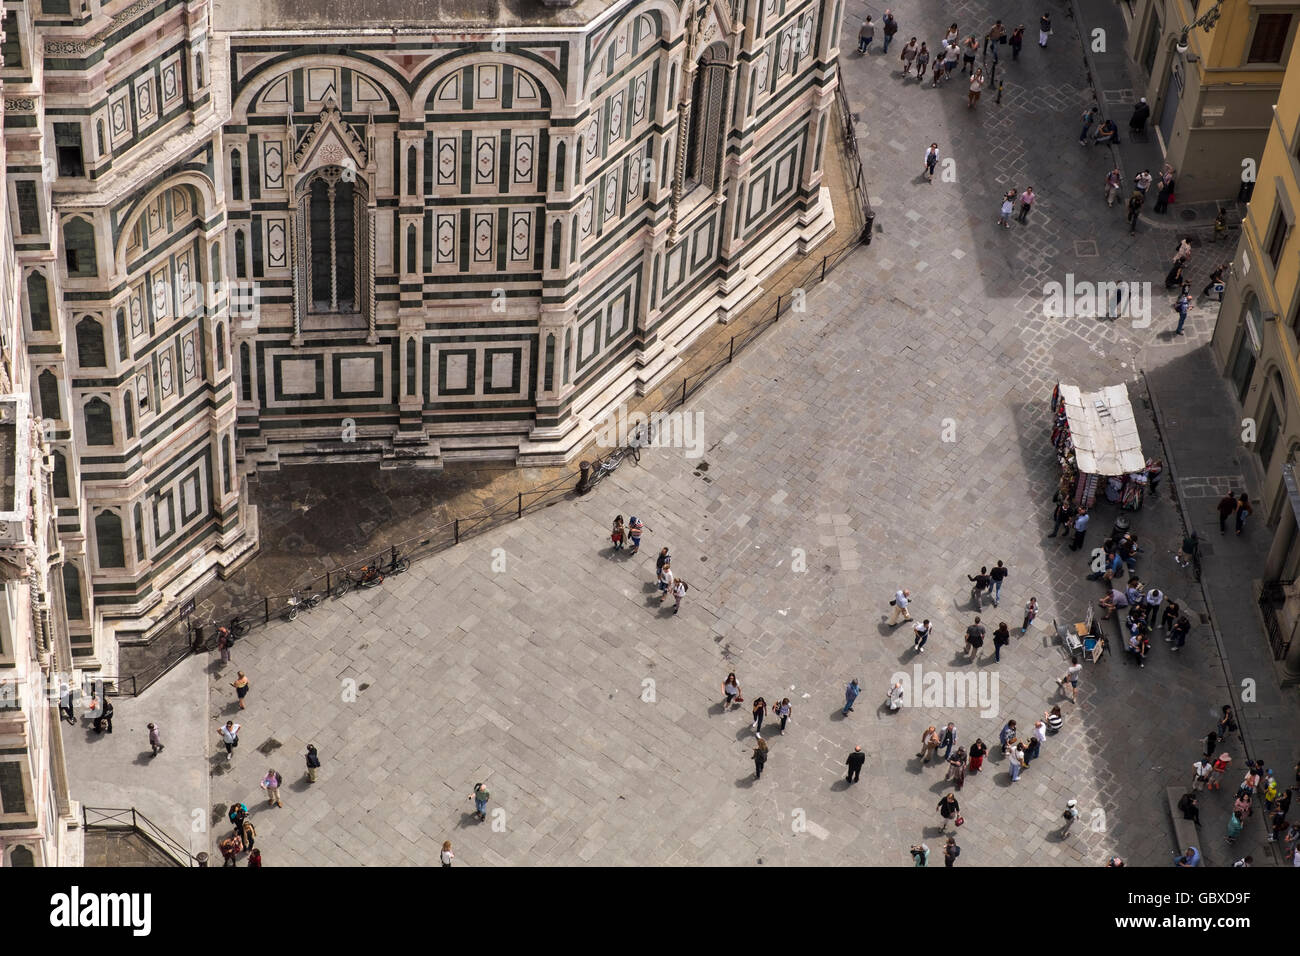 Looking down on people in the Piazza Duomo from the bell tower of the cathedral Santa Maria del Fiore, Florence, Tuscany, Italy Stock Photo